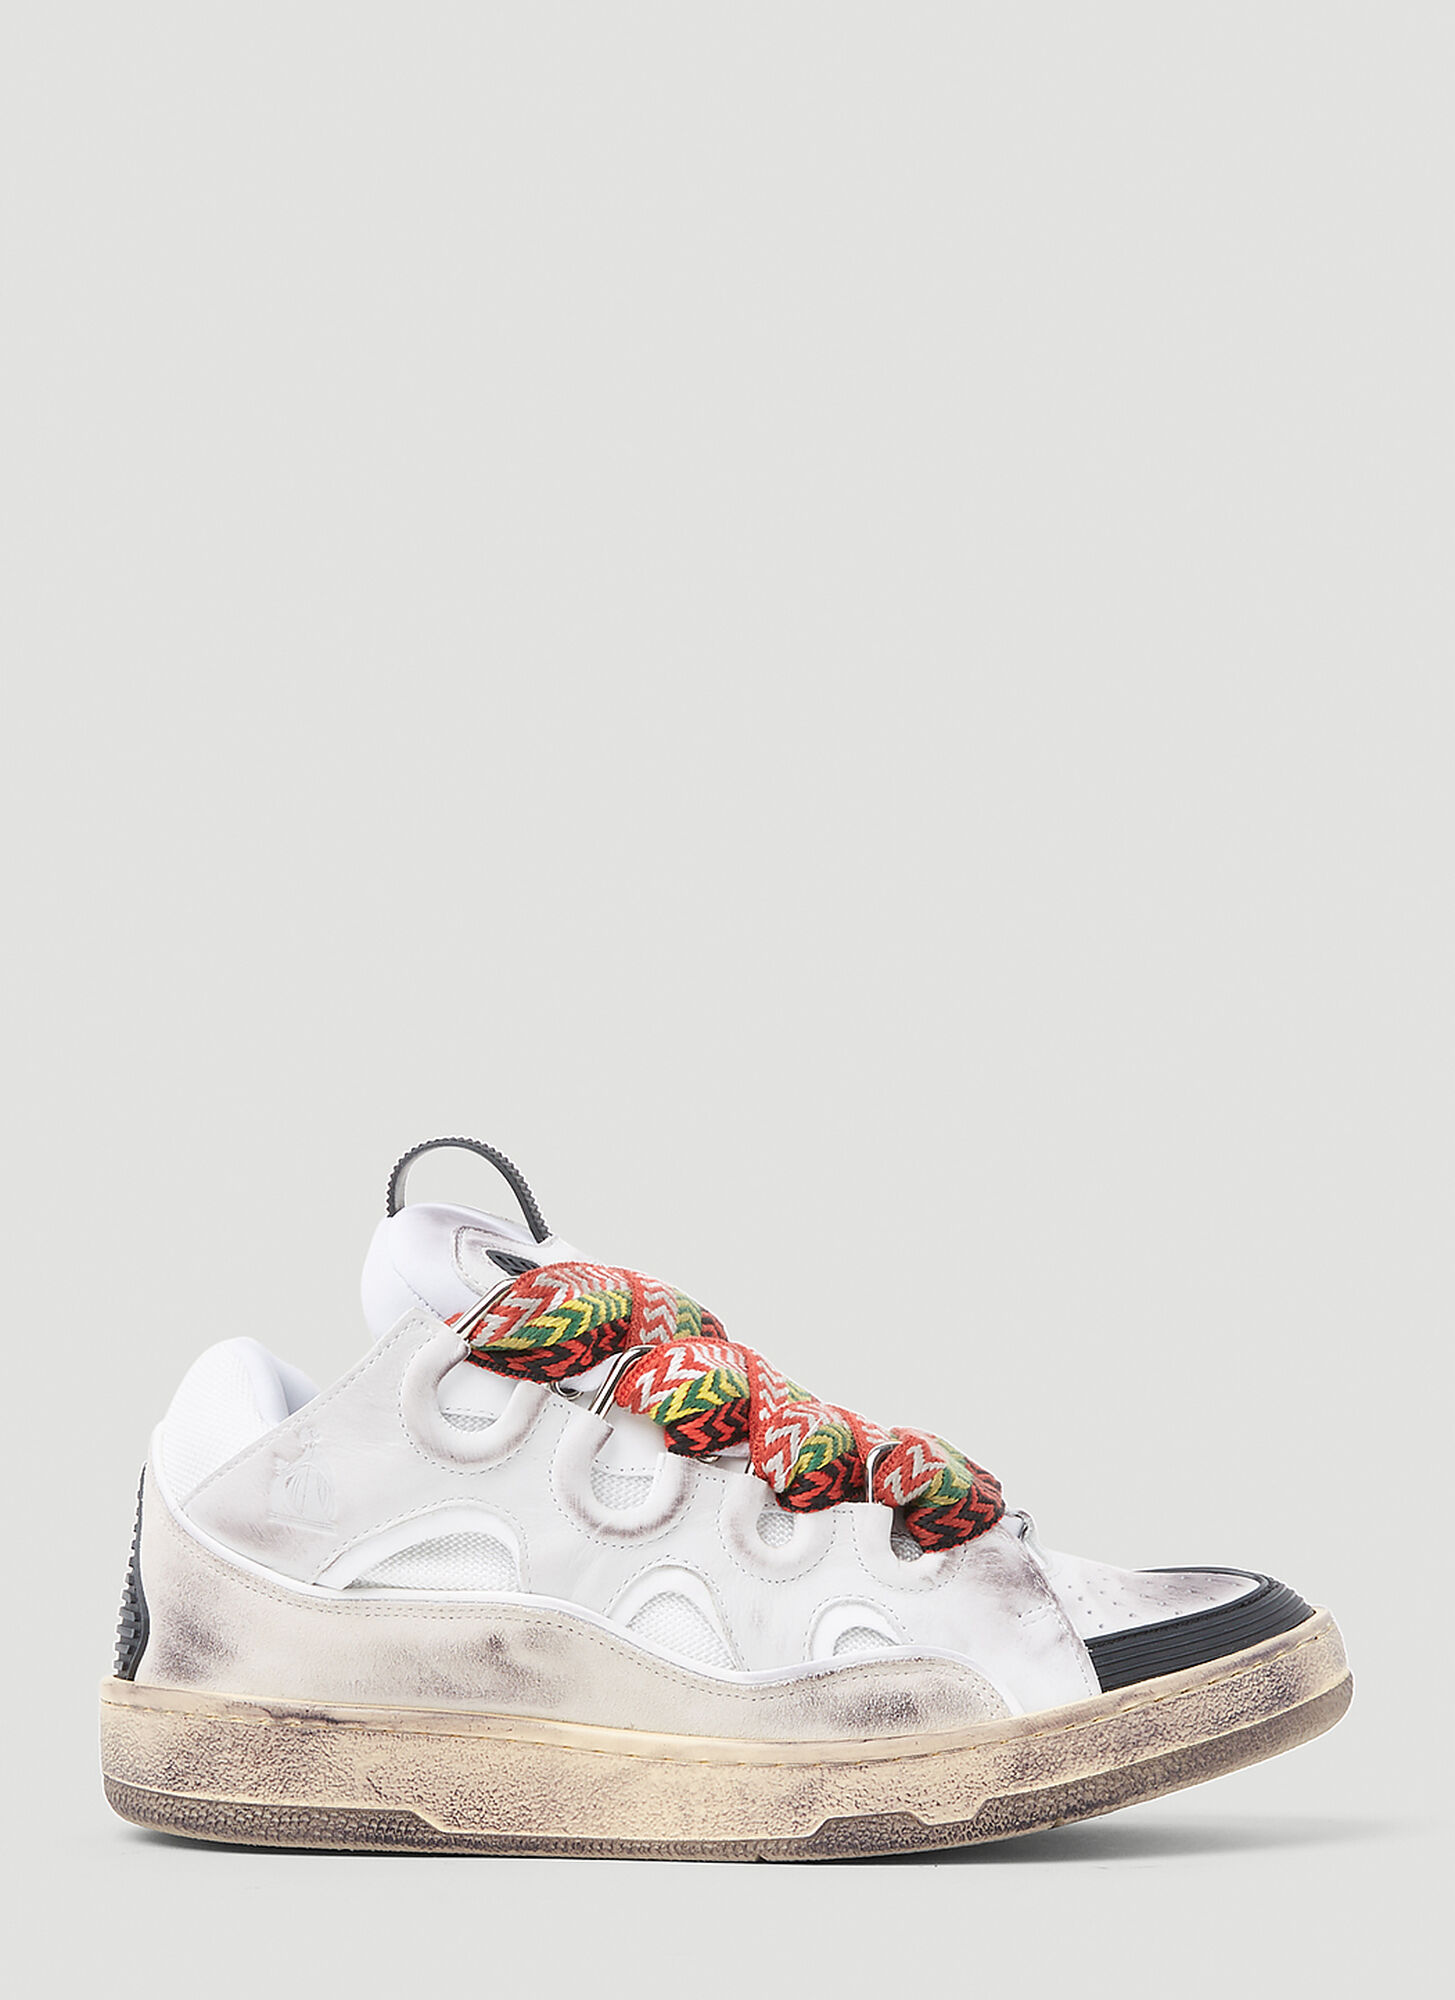 Lanvin Curb Leather And Glitter Sneakers In White